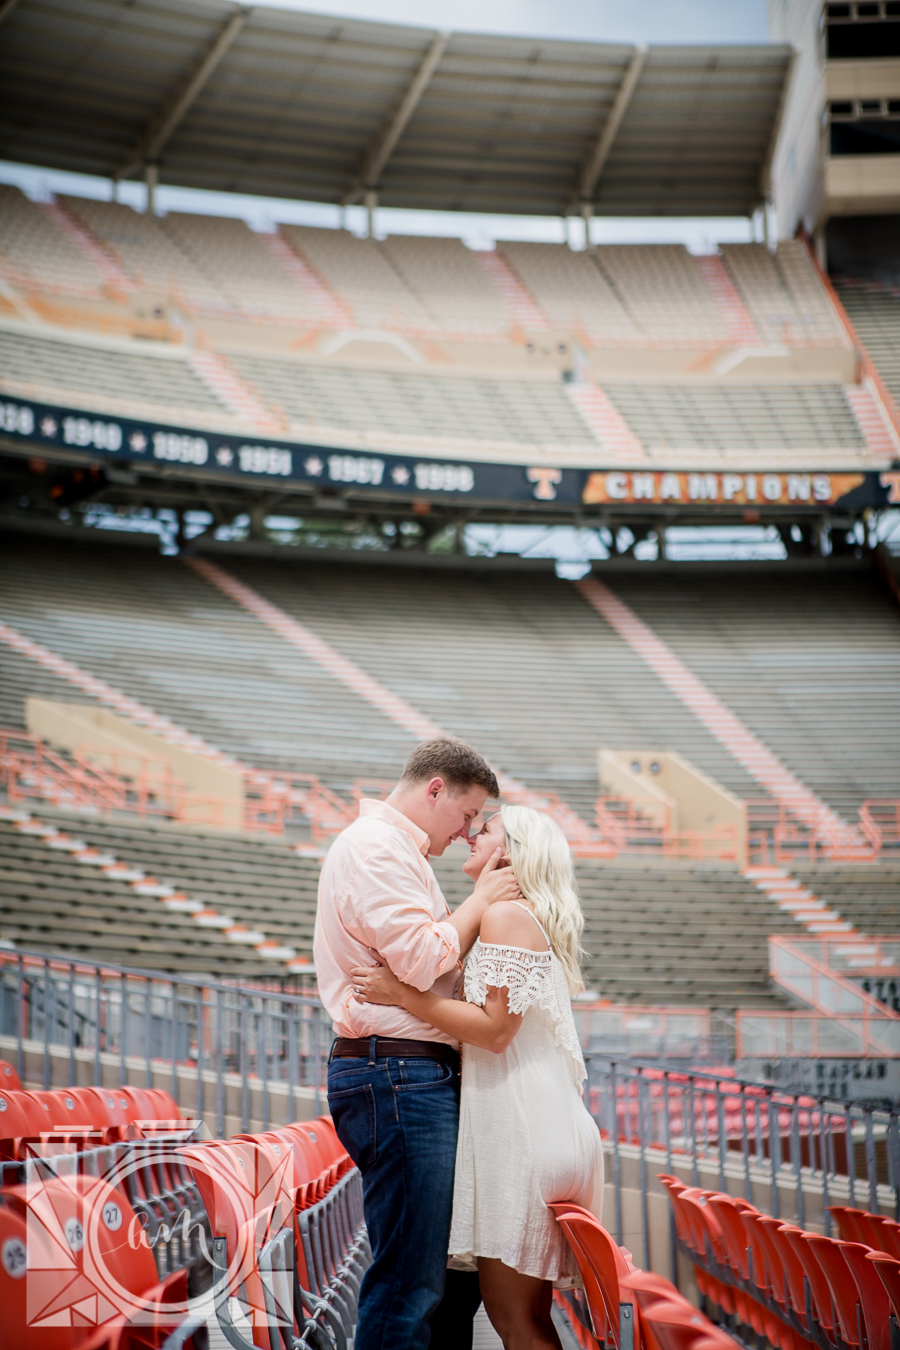 His hand on her cheek engagement photo by Knoxville Wedding Photographer, Amanda May Photos.